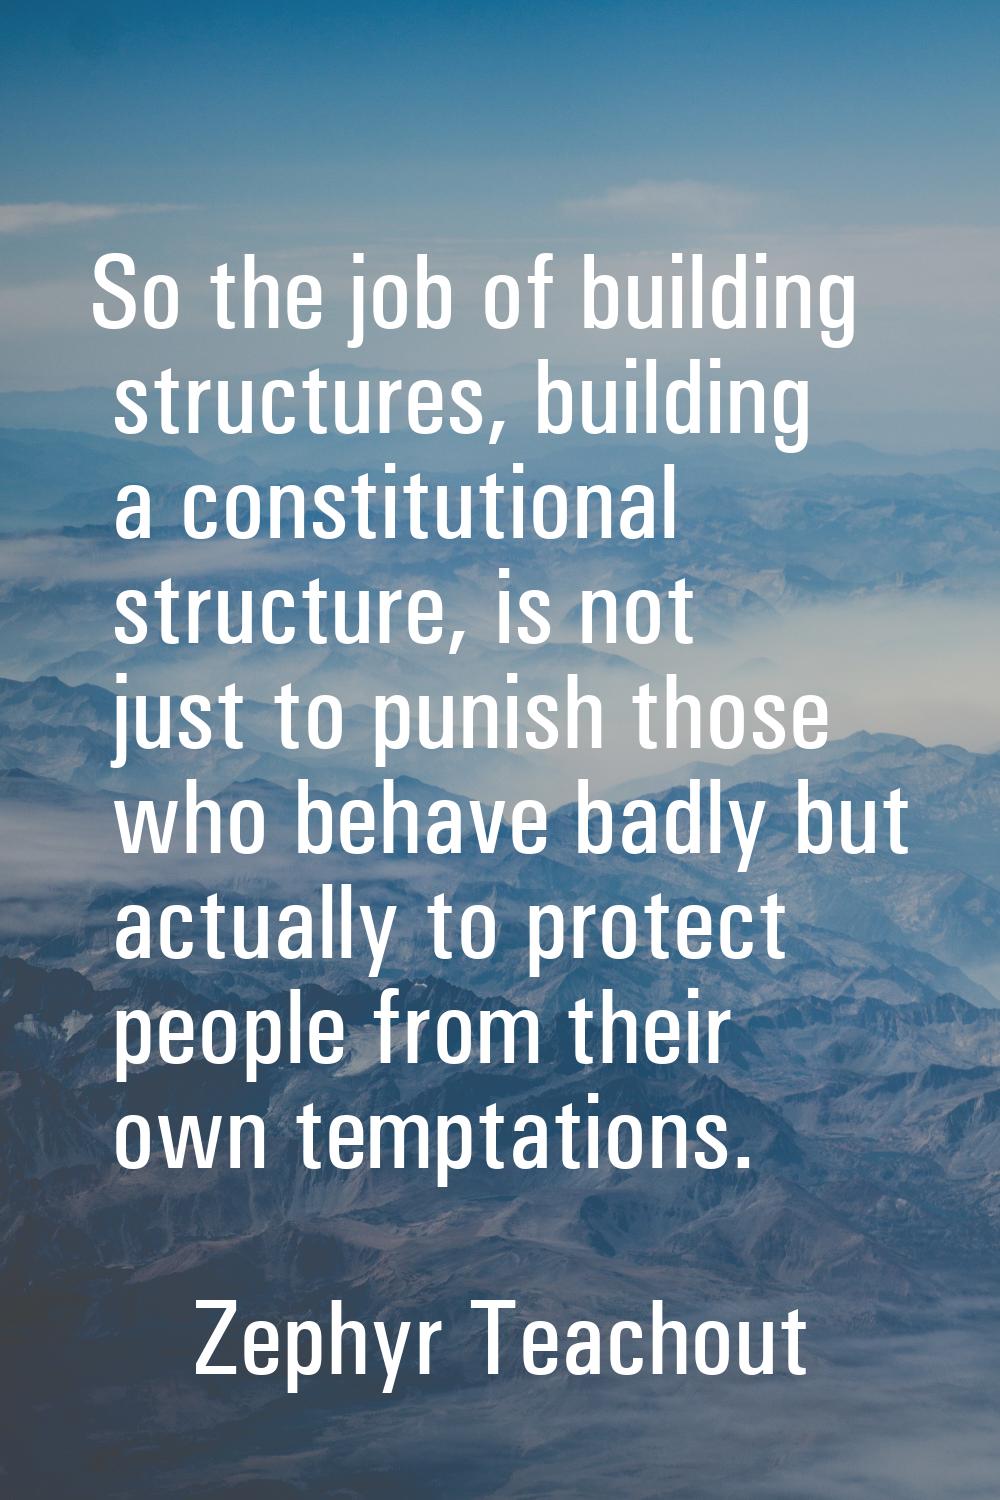 So the job of building structures, building a constitutional structure, is not just to punish those